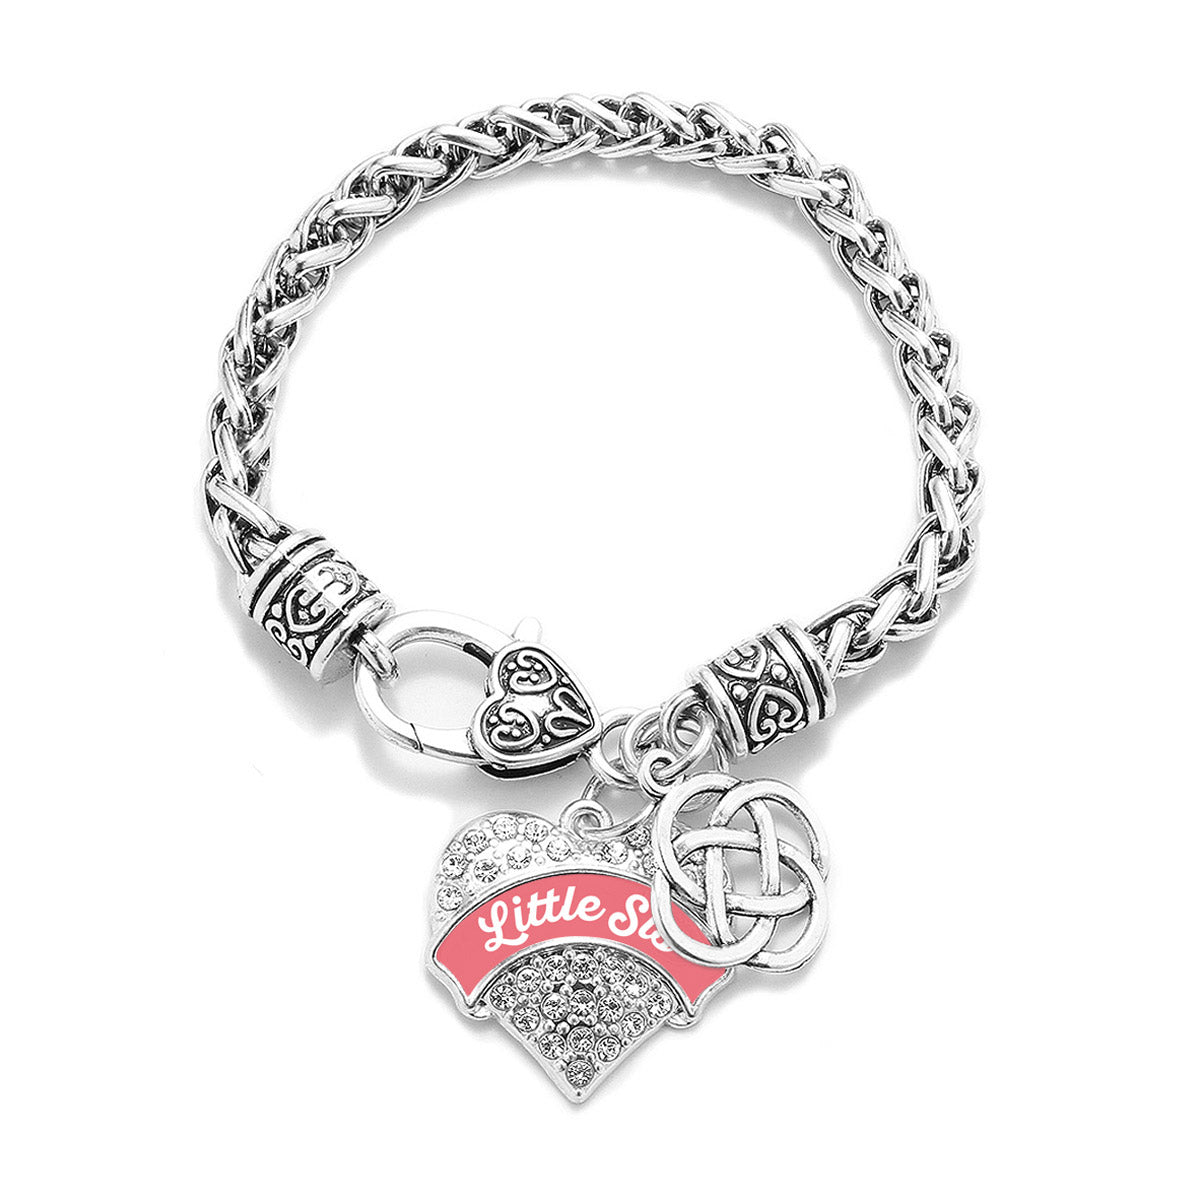 Silver Coral Little Sis Celtic Knot Pave Heart Charm Braided Bracelet